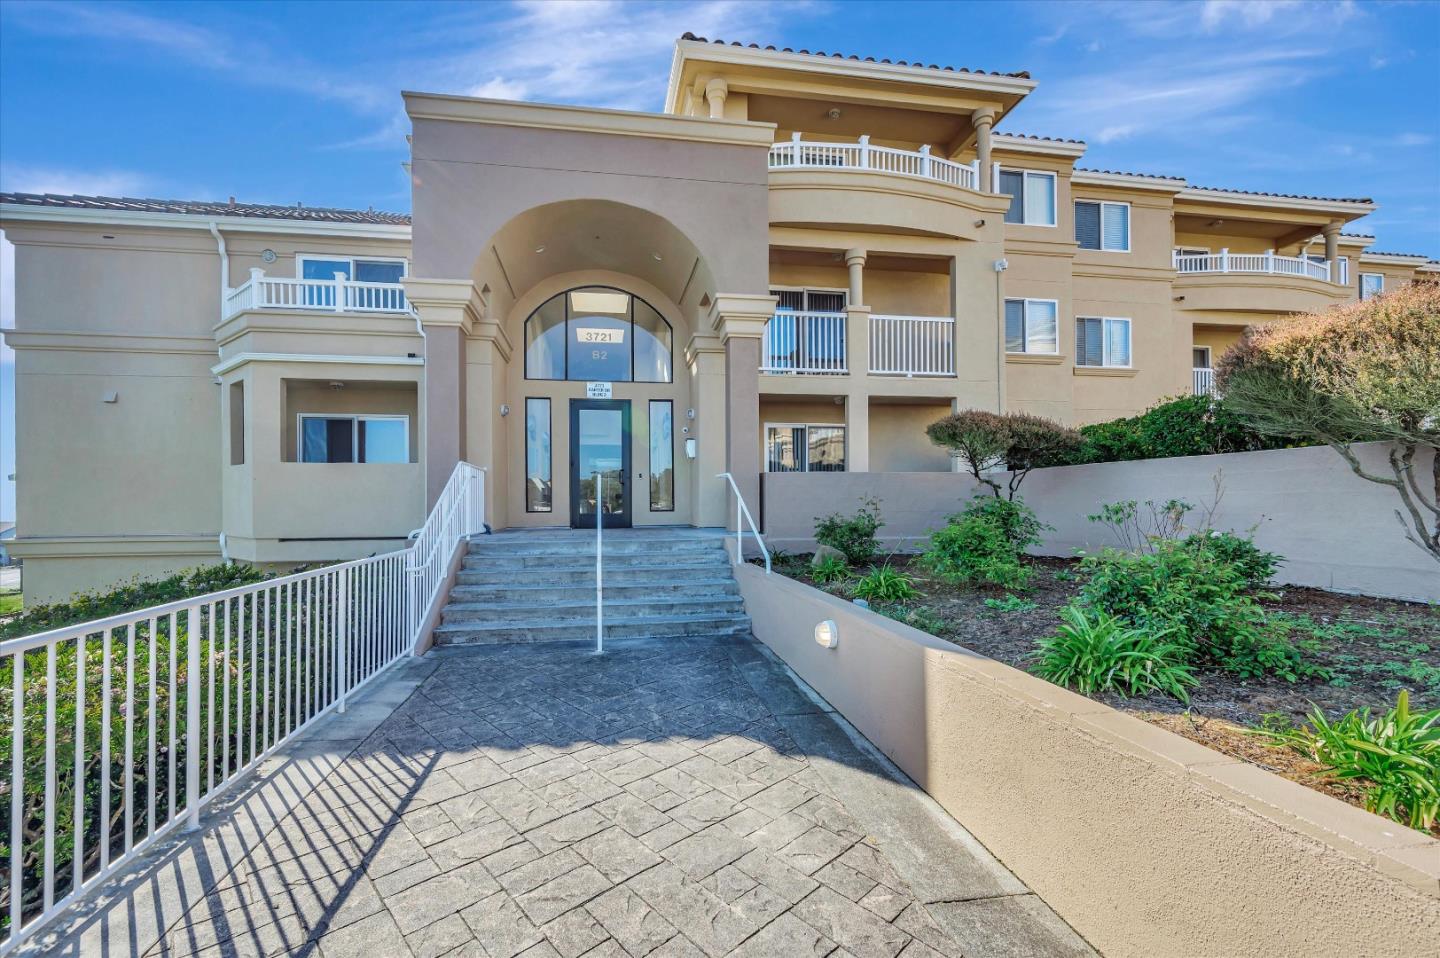 Photo of 3721 Carter Dr #2203 in South San Francisco, CA